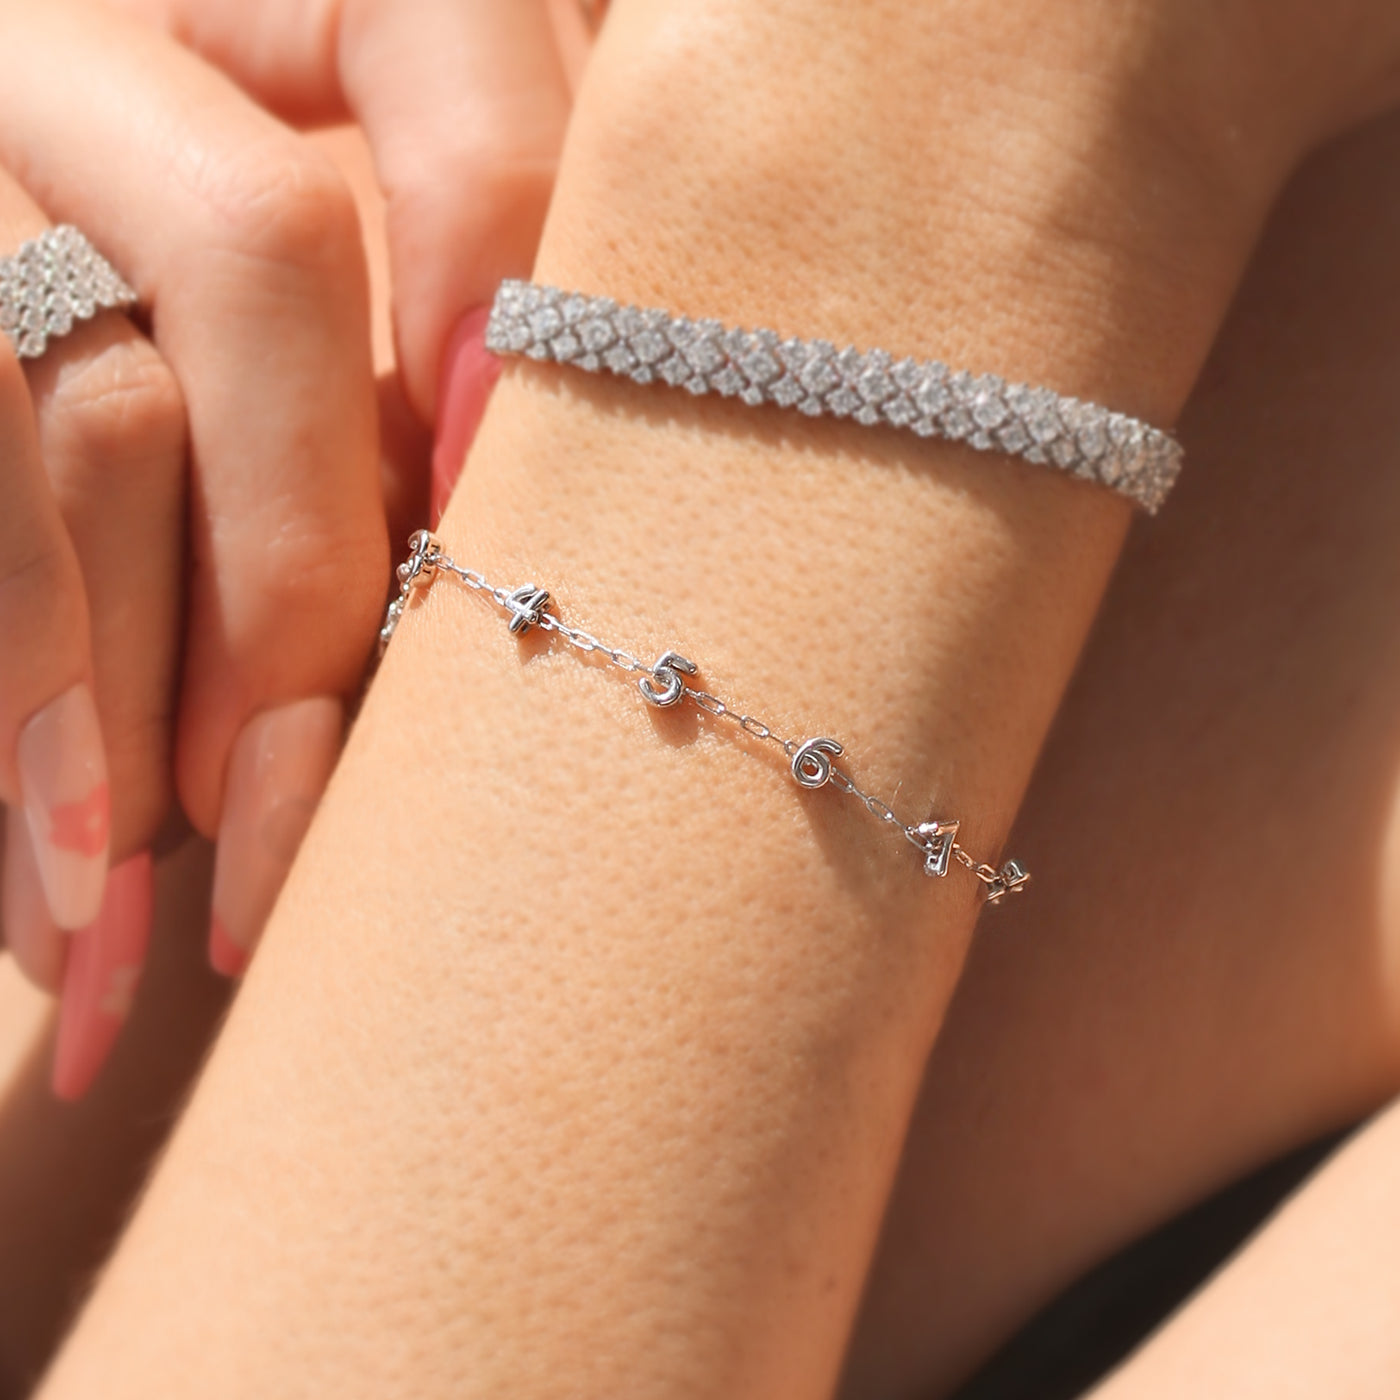 Puffed Shine Number Bracelet | Anklet – Personalized Charm in 14K Gold